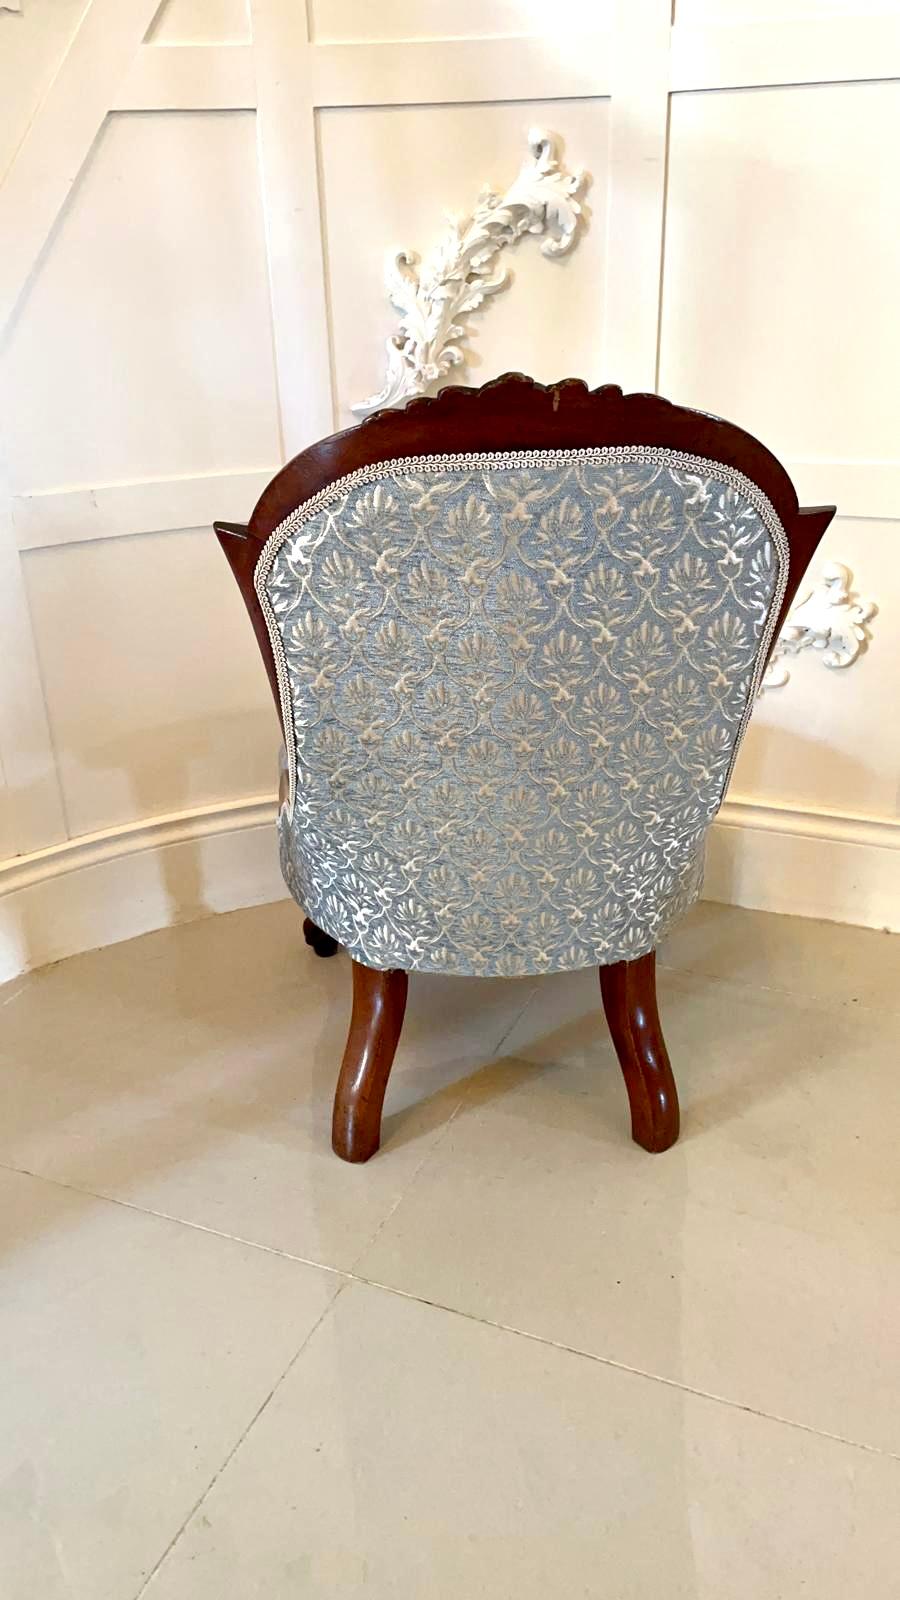 Quality antique 19th century Victorian carved walnut ladies chair with a marvelous carved shaped top rail, shaped back and serpentine front rail. Raised on elegant shaped cabriole legs to the front and out swept back legs.

Wonderful condition and